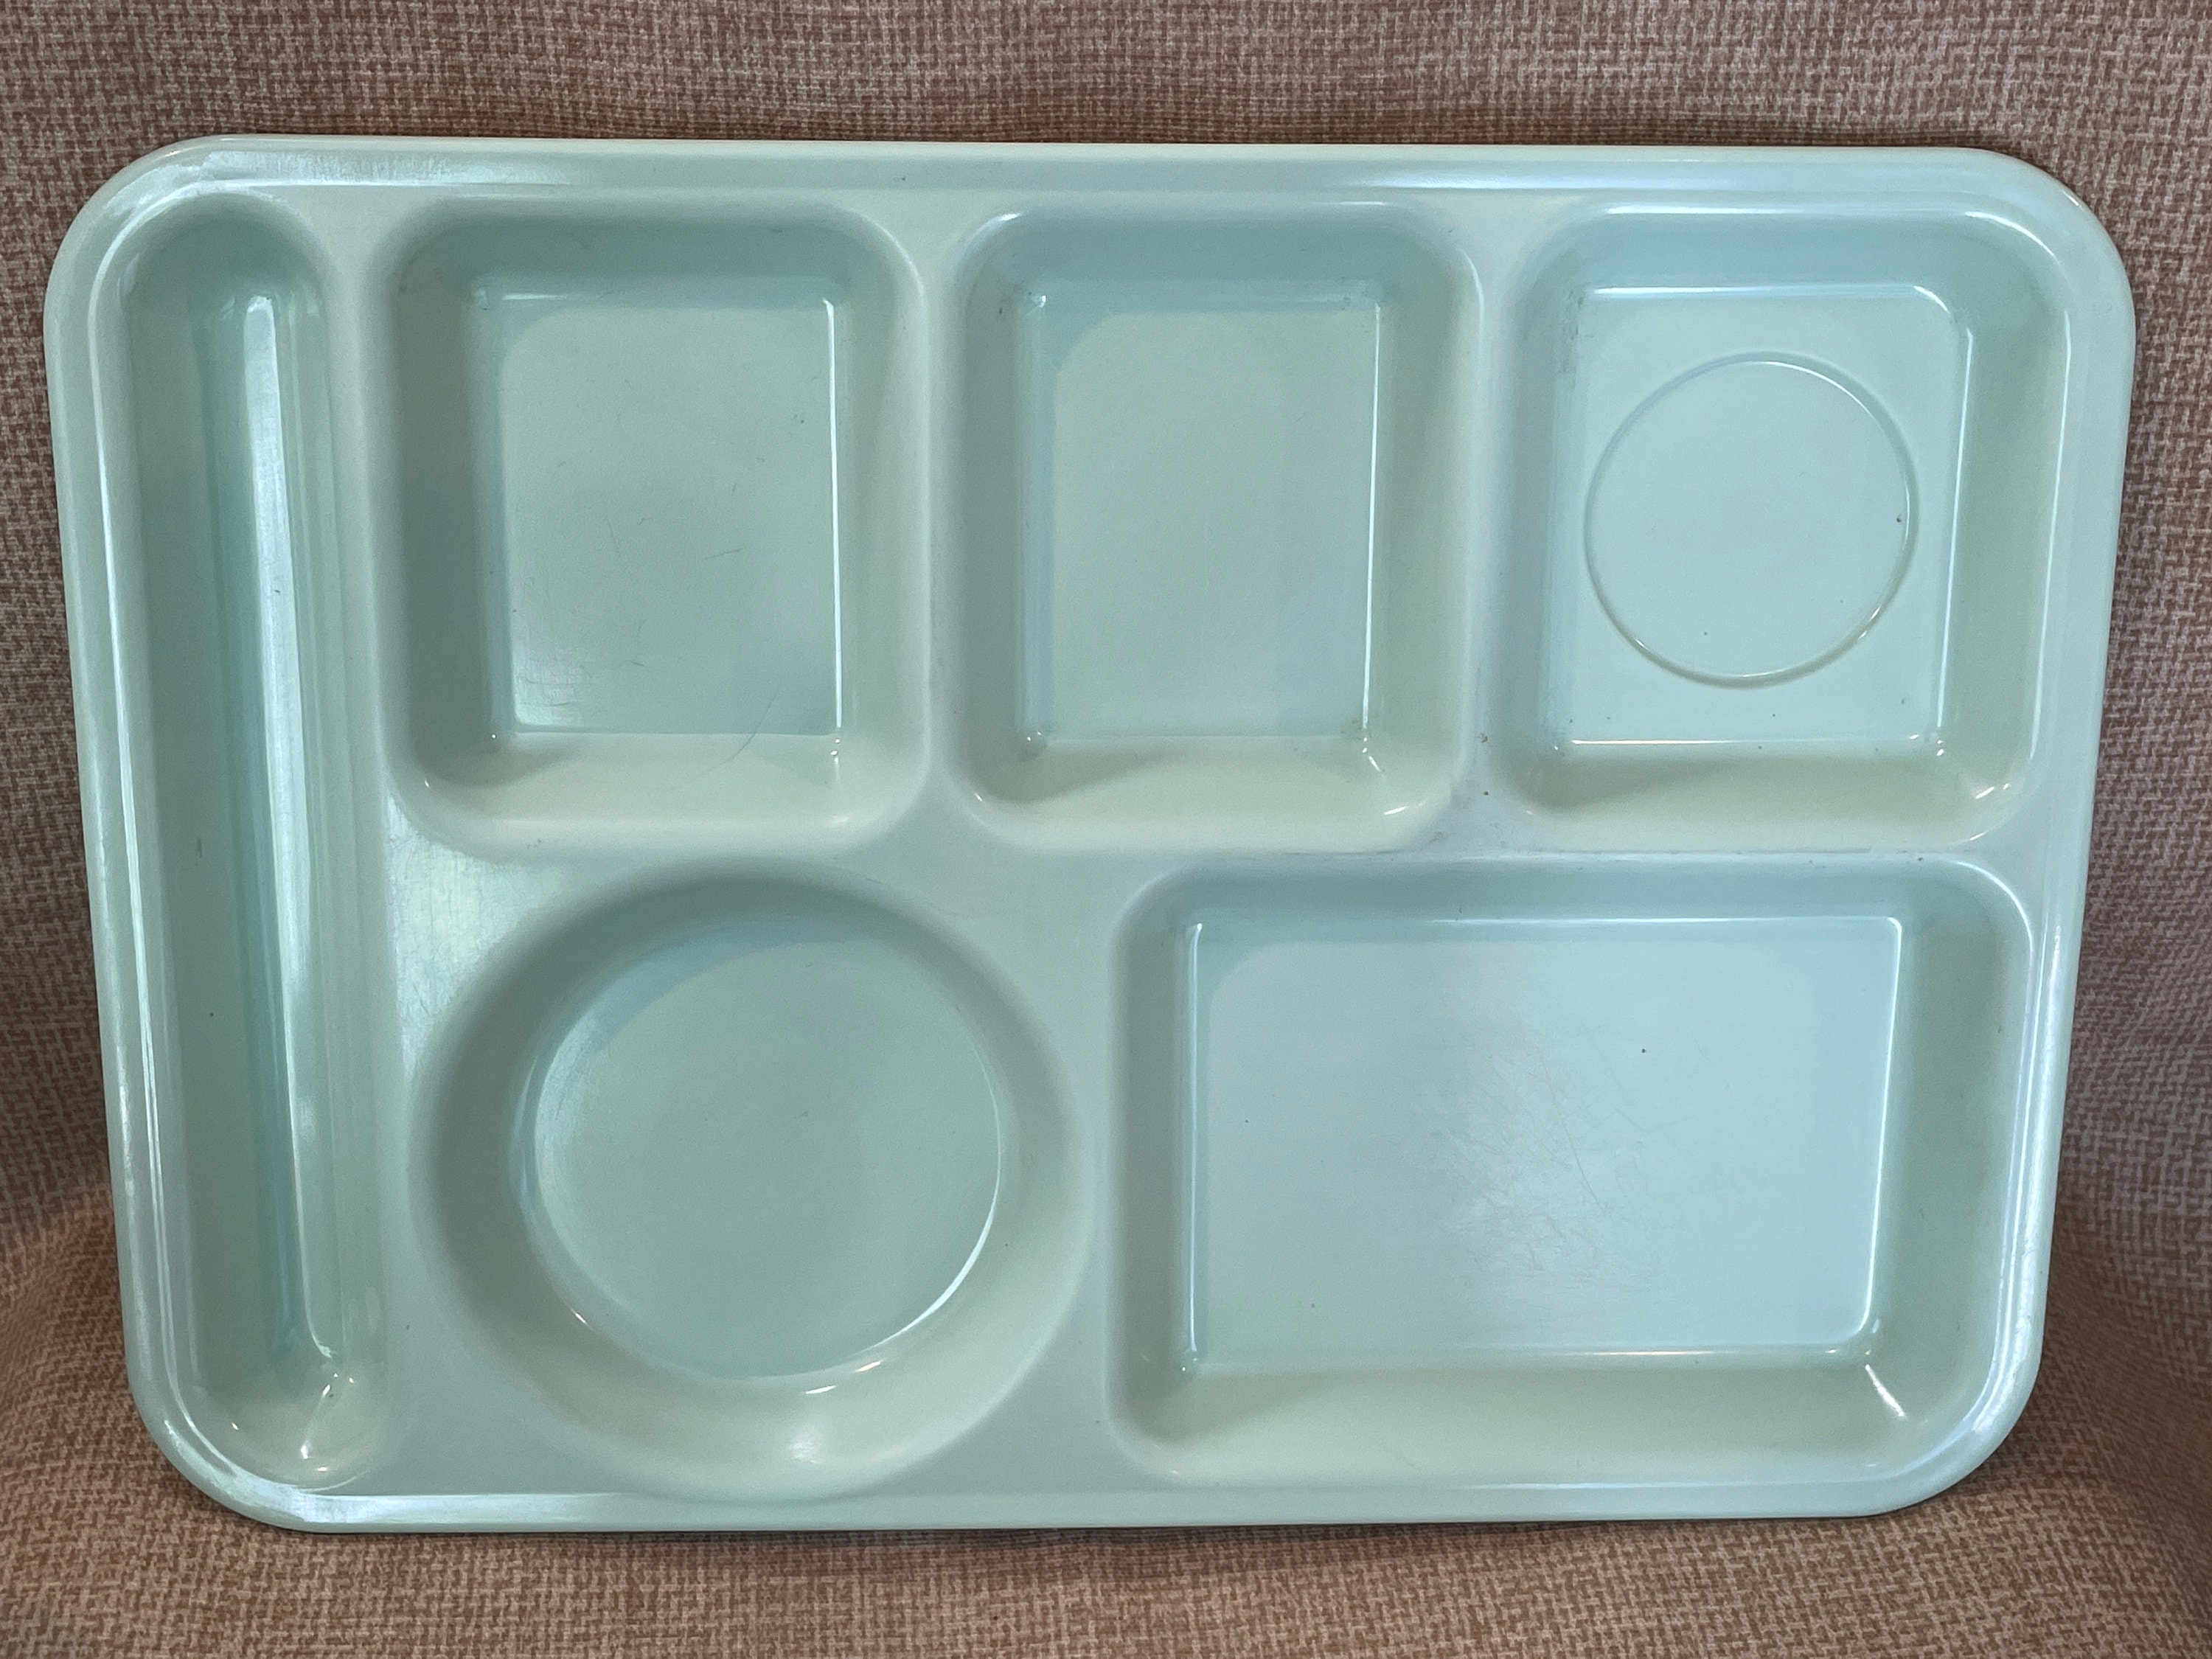 Vintage Voilrath Lunch Tray / School Lunch Trays / Home School